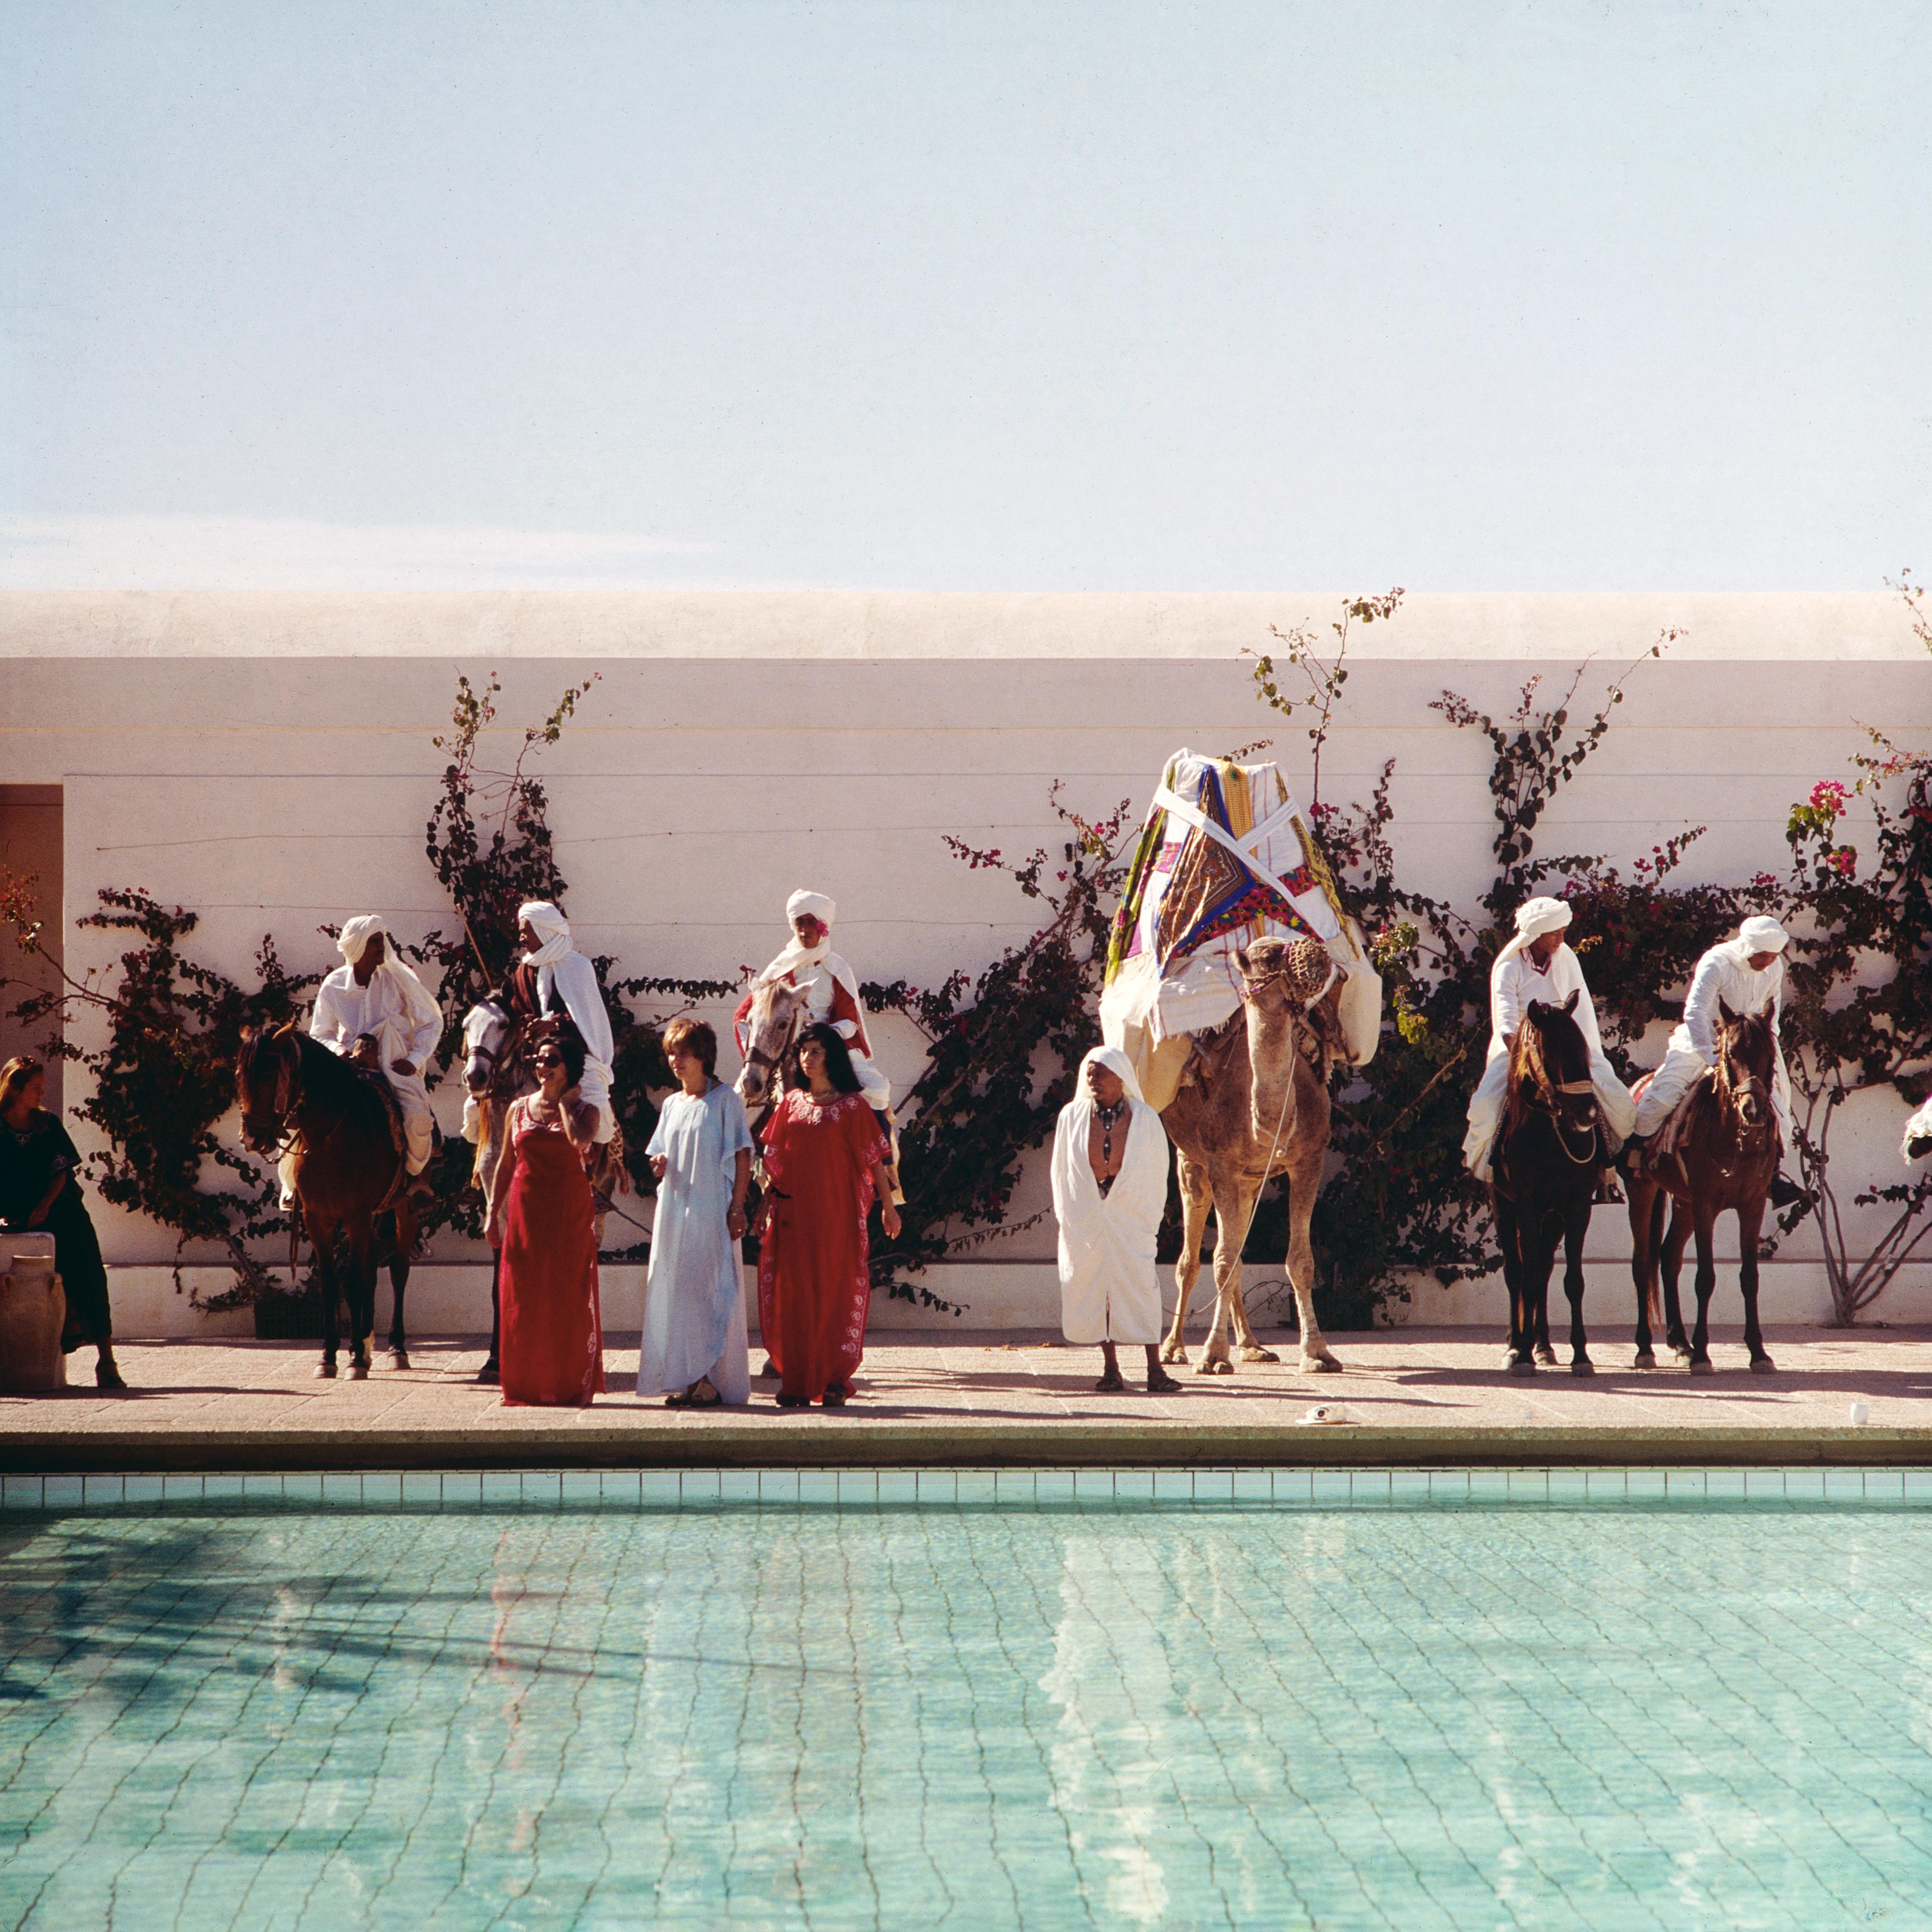 Walter Rudolph

His photographs are reminiscent of the jet-set photographer Slim Aarons. Walter Rudolph discovered the world as a photographer on the idea, travel was his passion, his clients took him to the hottest places in the world in the 1970s